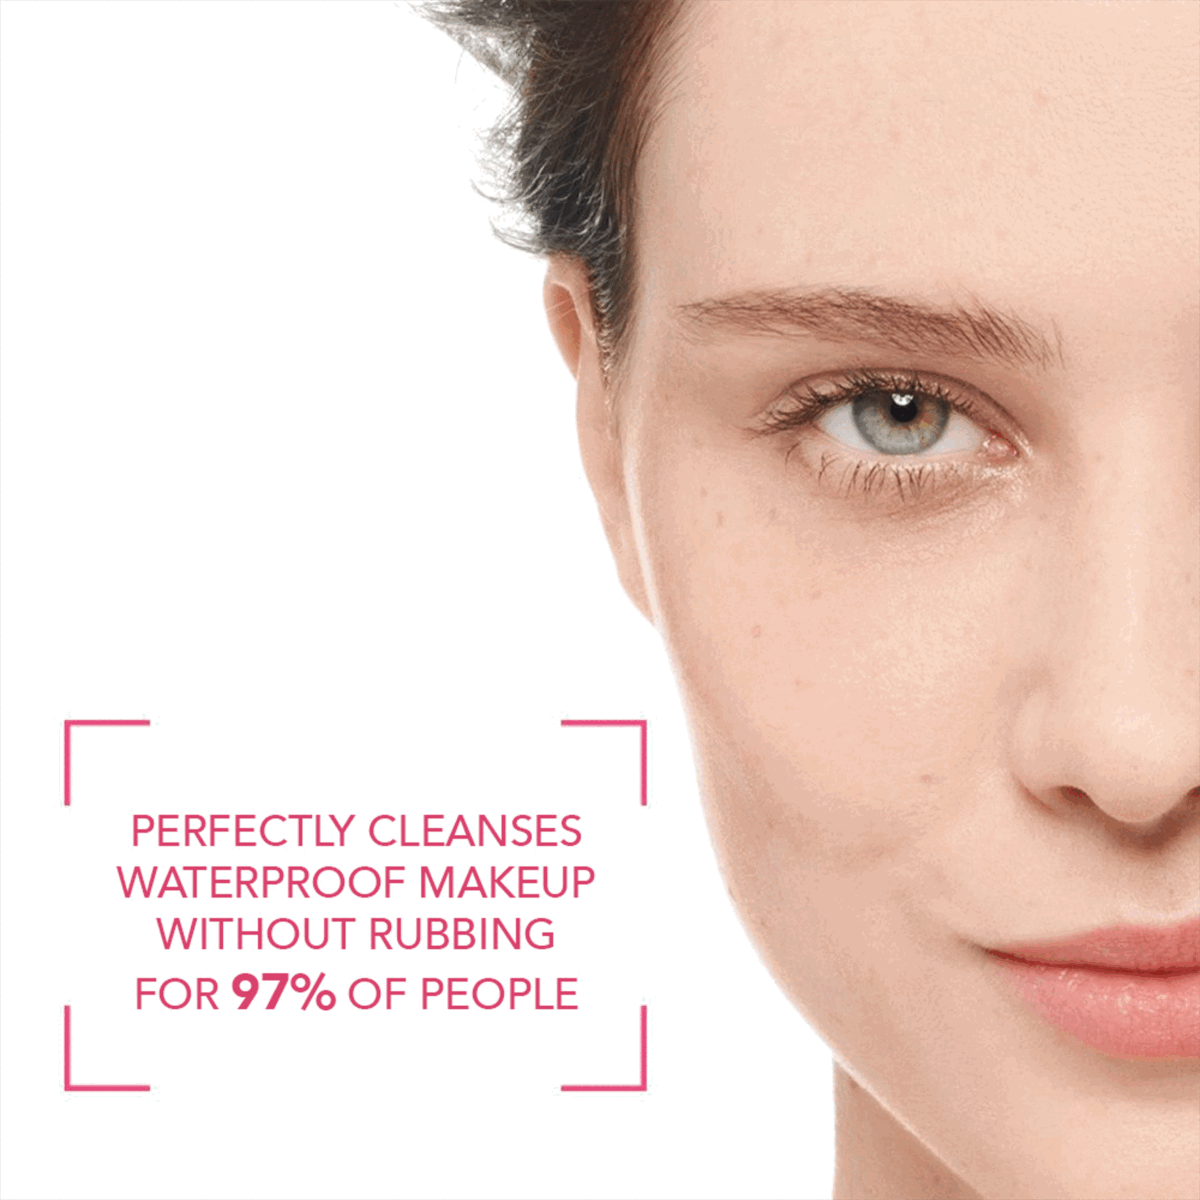 Image 1, perfectly cleanses waterproof makeup without rubbing for 97% of people Image 2, strengthening eyelashes for 93% of people after 28 days of usage Image 3, 3 step routine that supports and strengthens sensitive skin 1 removes waterproof makeup, 2 cleanses the skin 3, hydrates and soothes